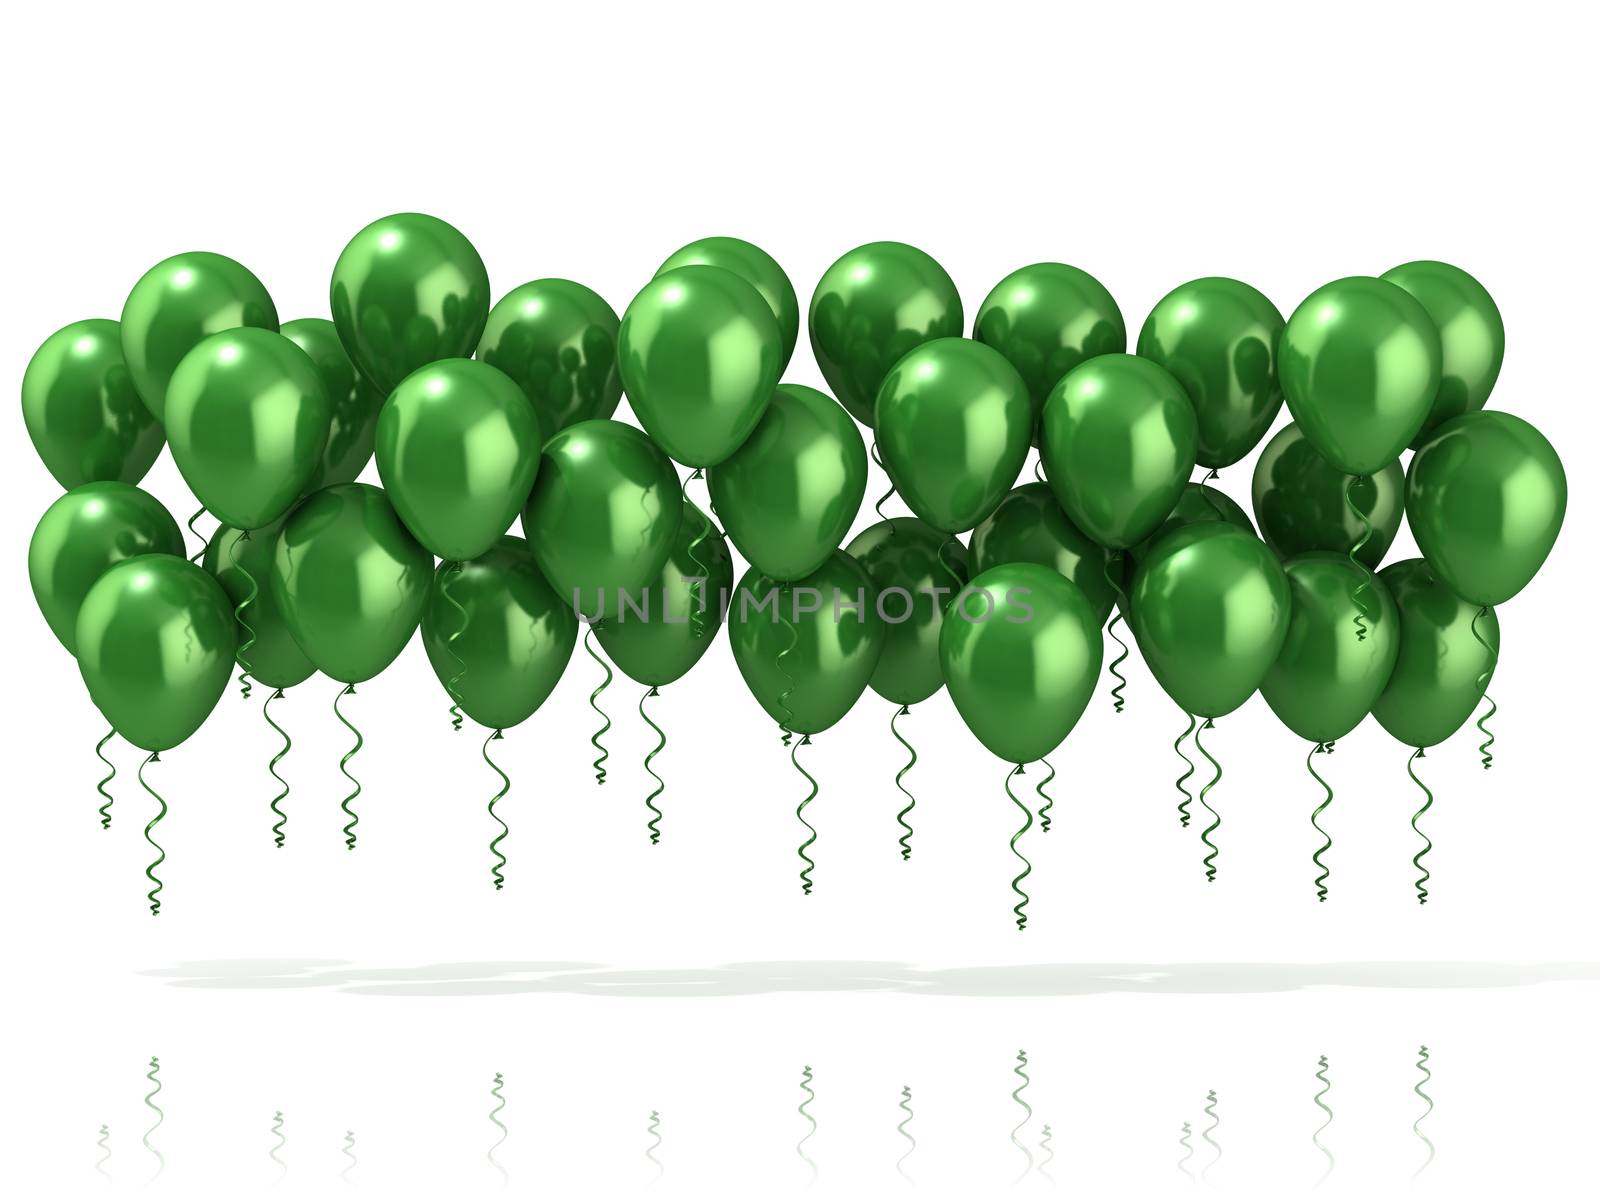 Green party balloons row by djmilic